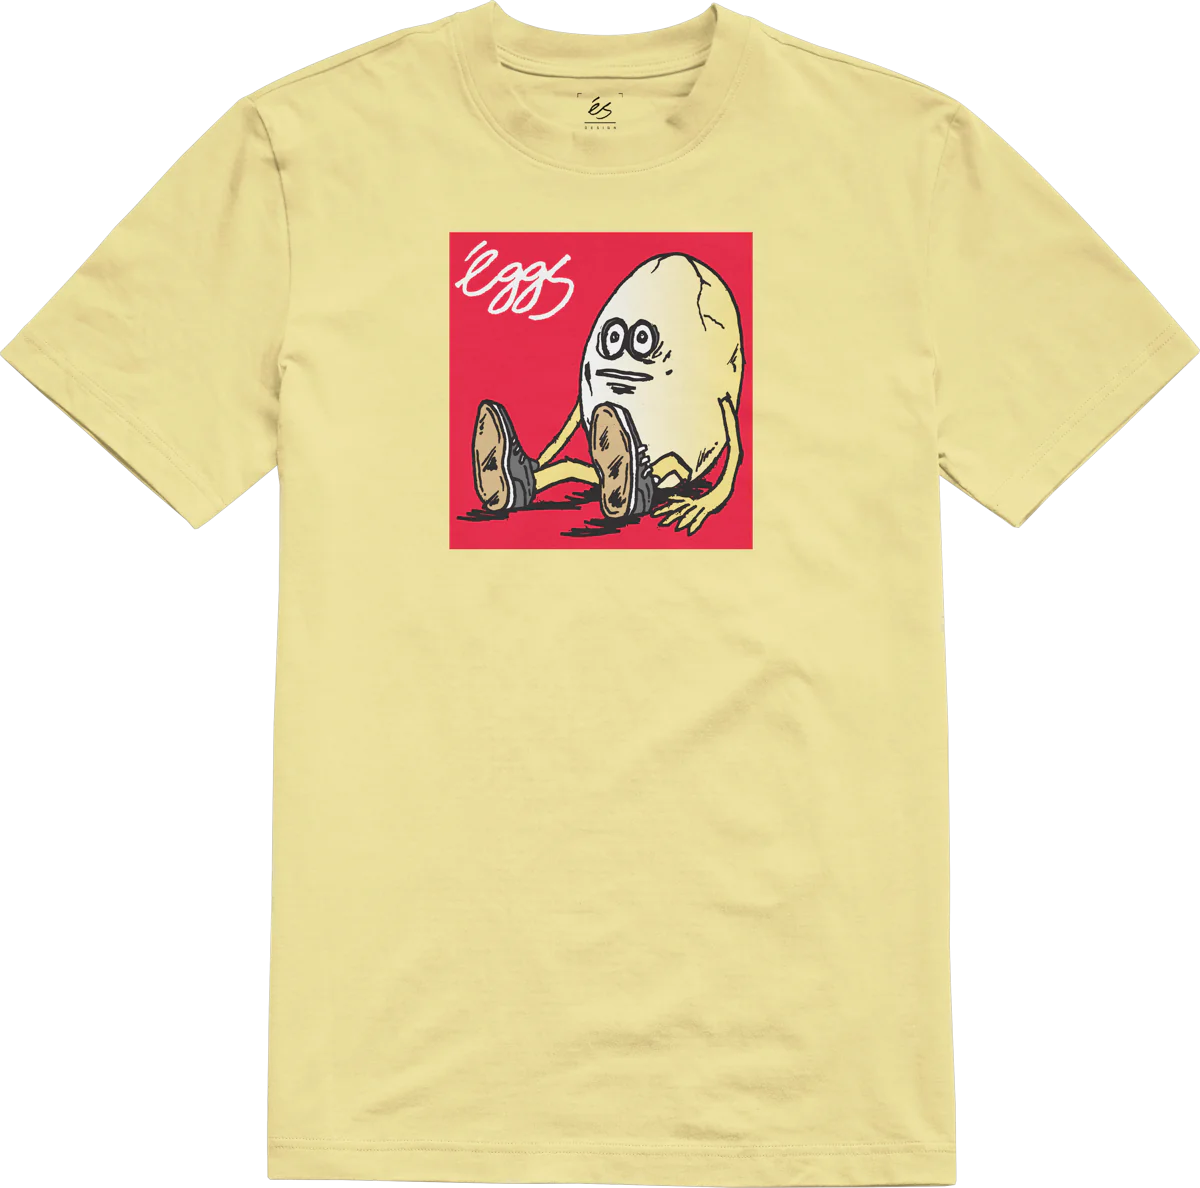 Es - Eggcell Egg Guy Tee